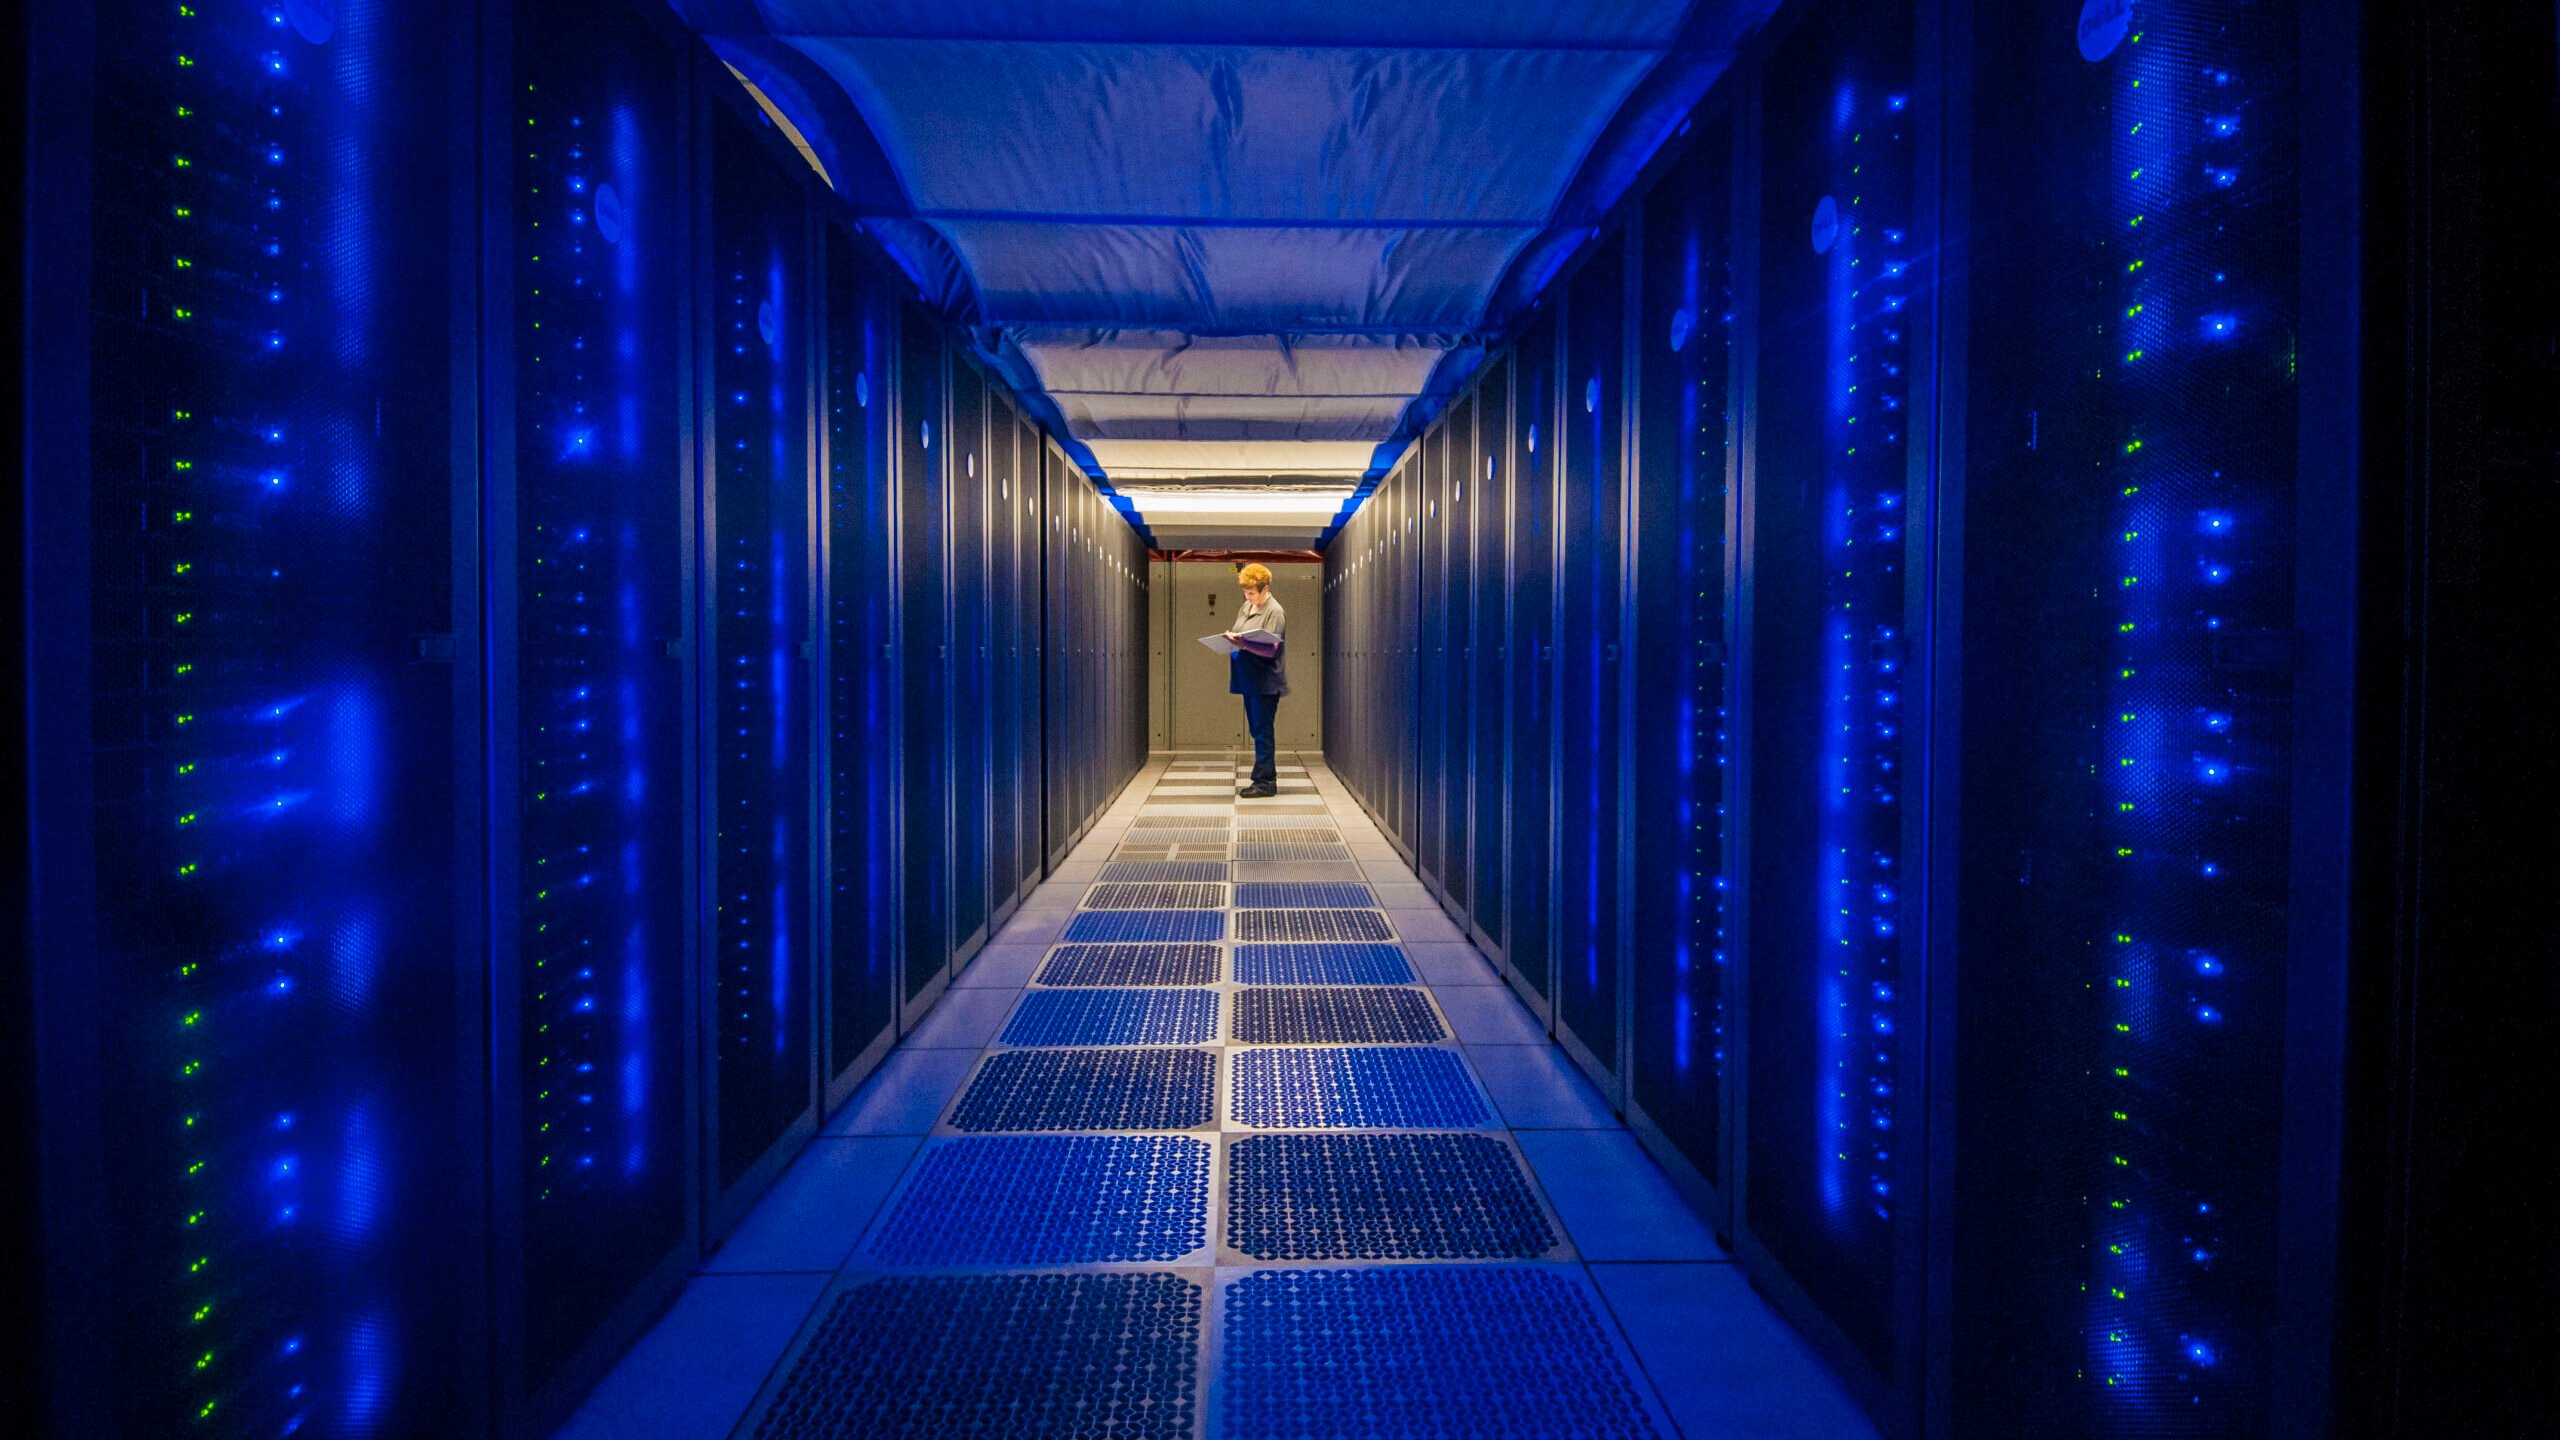 WASHINGTON: The Pentagon recently completed a $68 million acquisition of two new supercomputing platforms and related technical services that rank amo